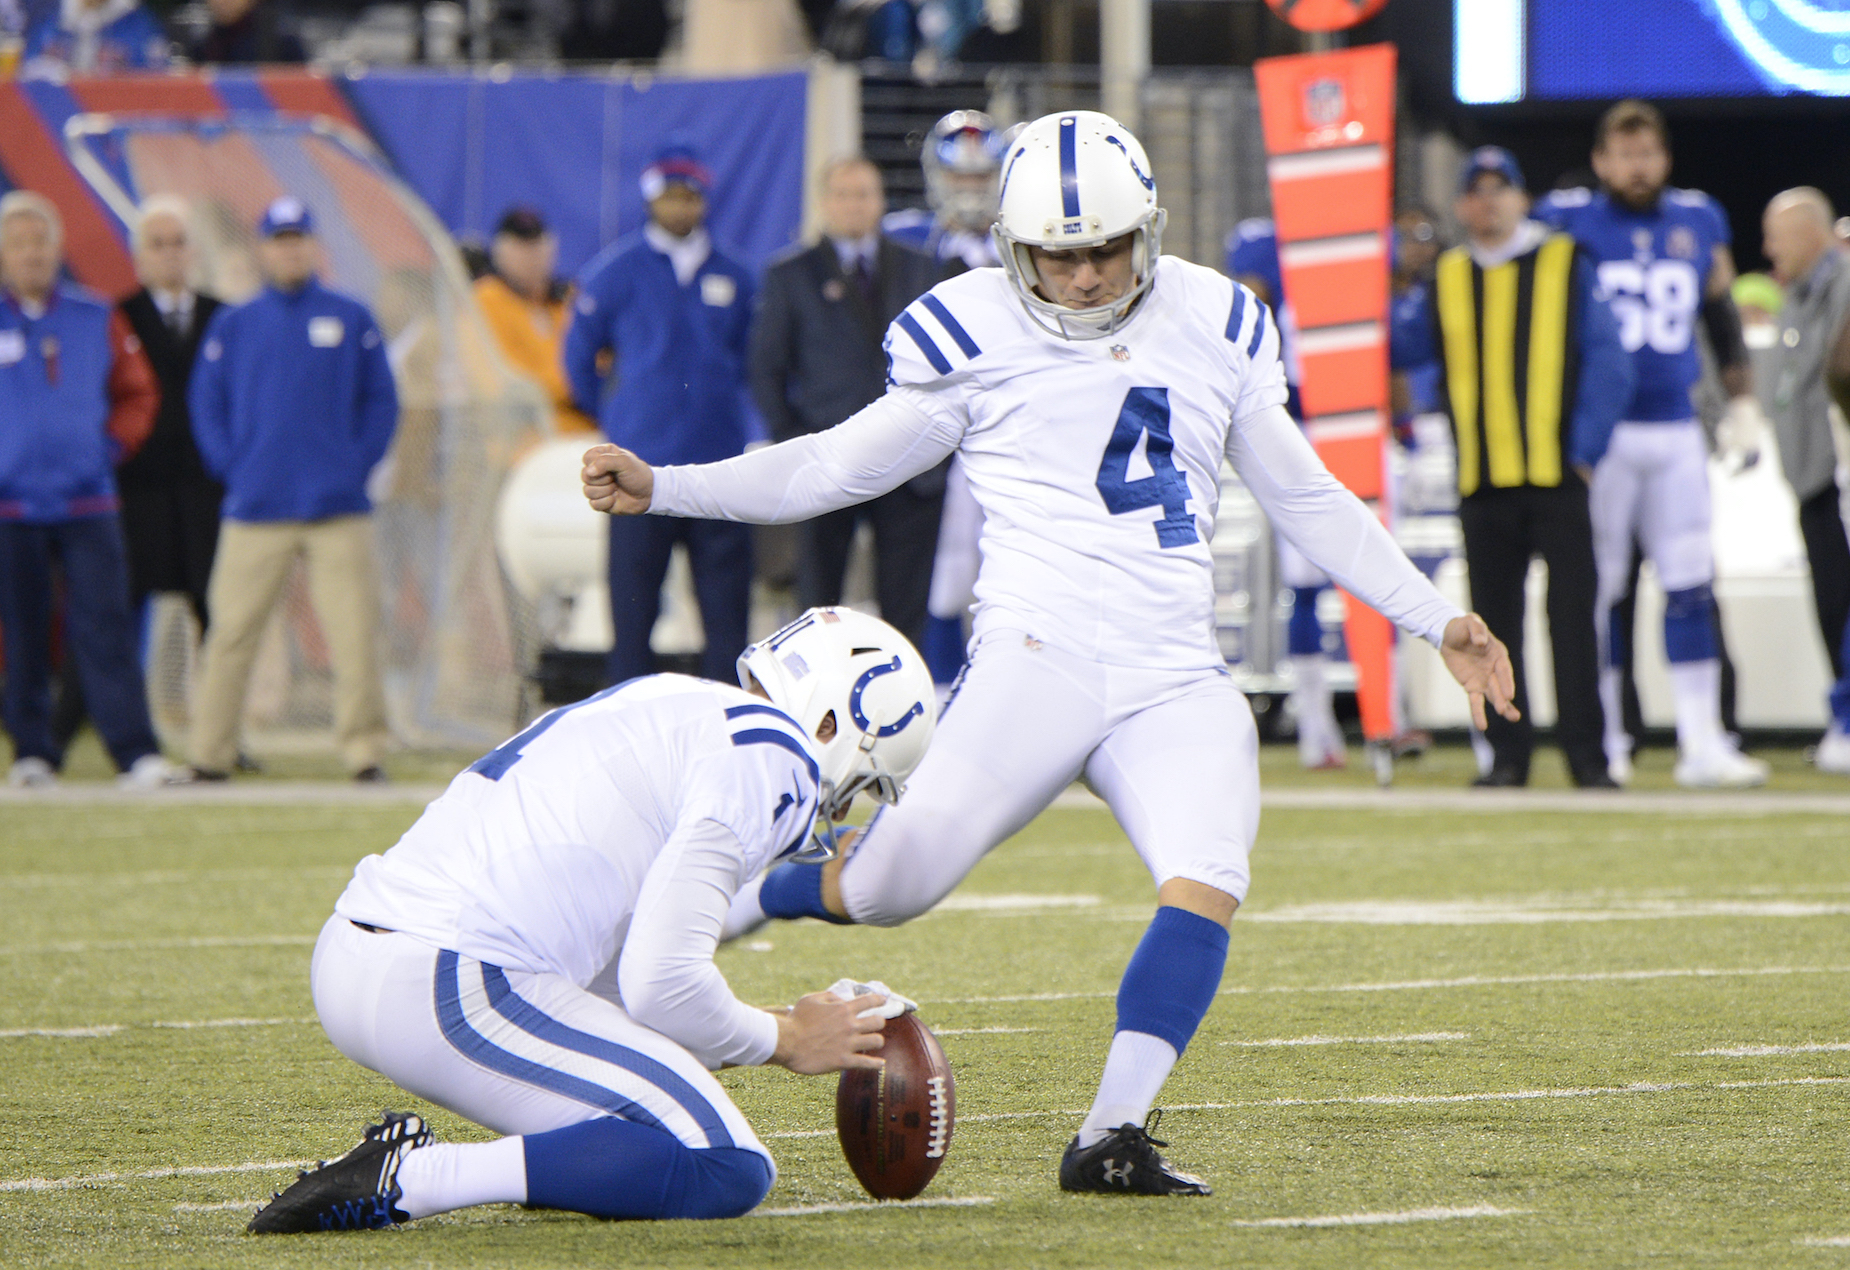 Adam Vinatieri Retires From Professional Football With 4 Super Bowl Championships and a $25 Million Net Worth